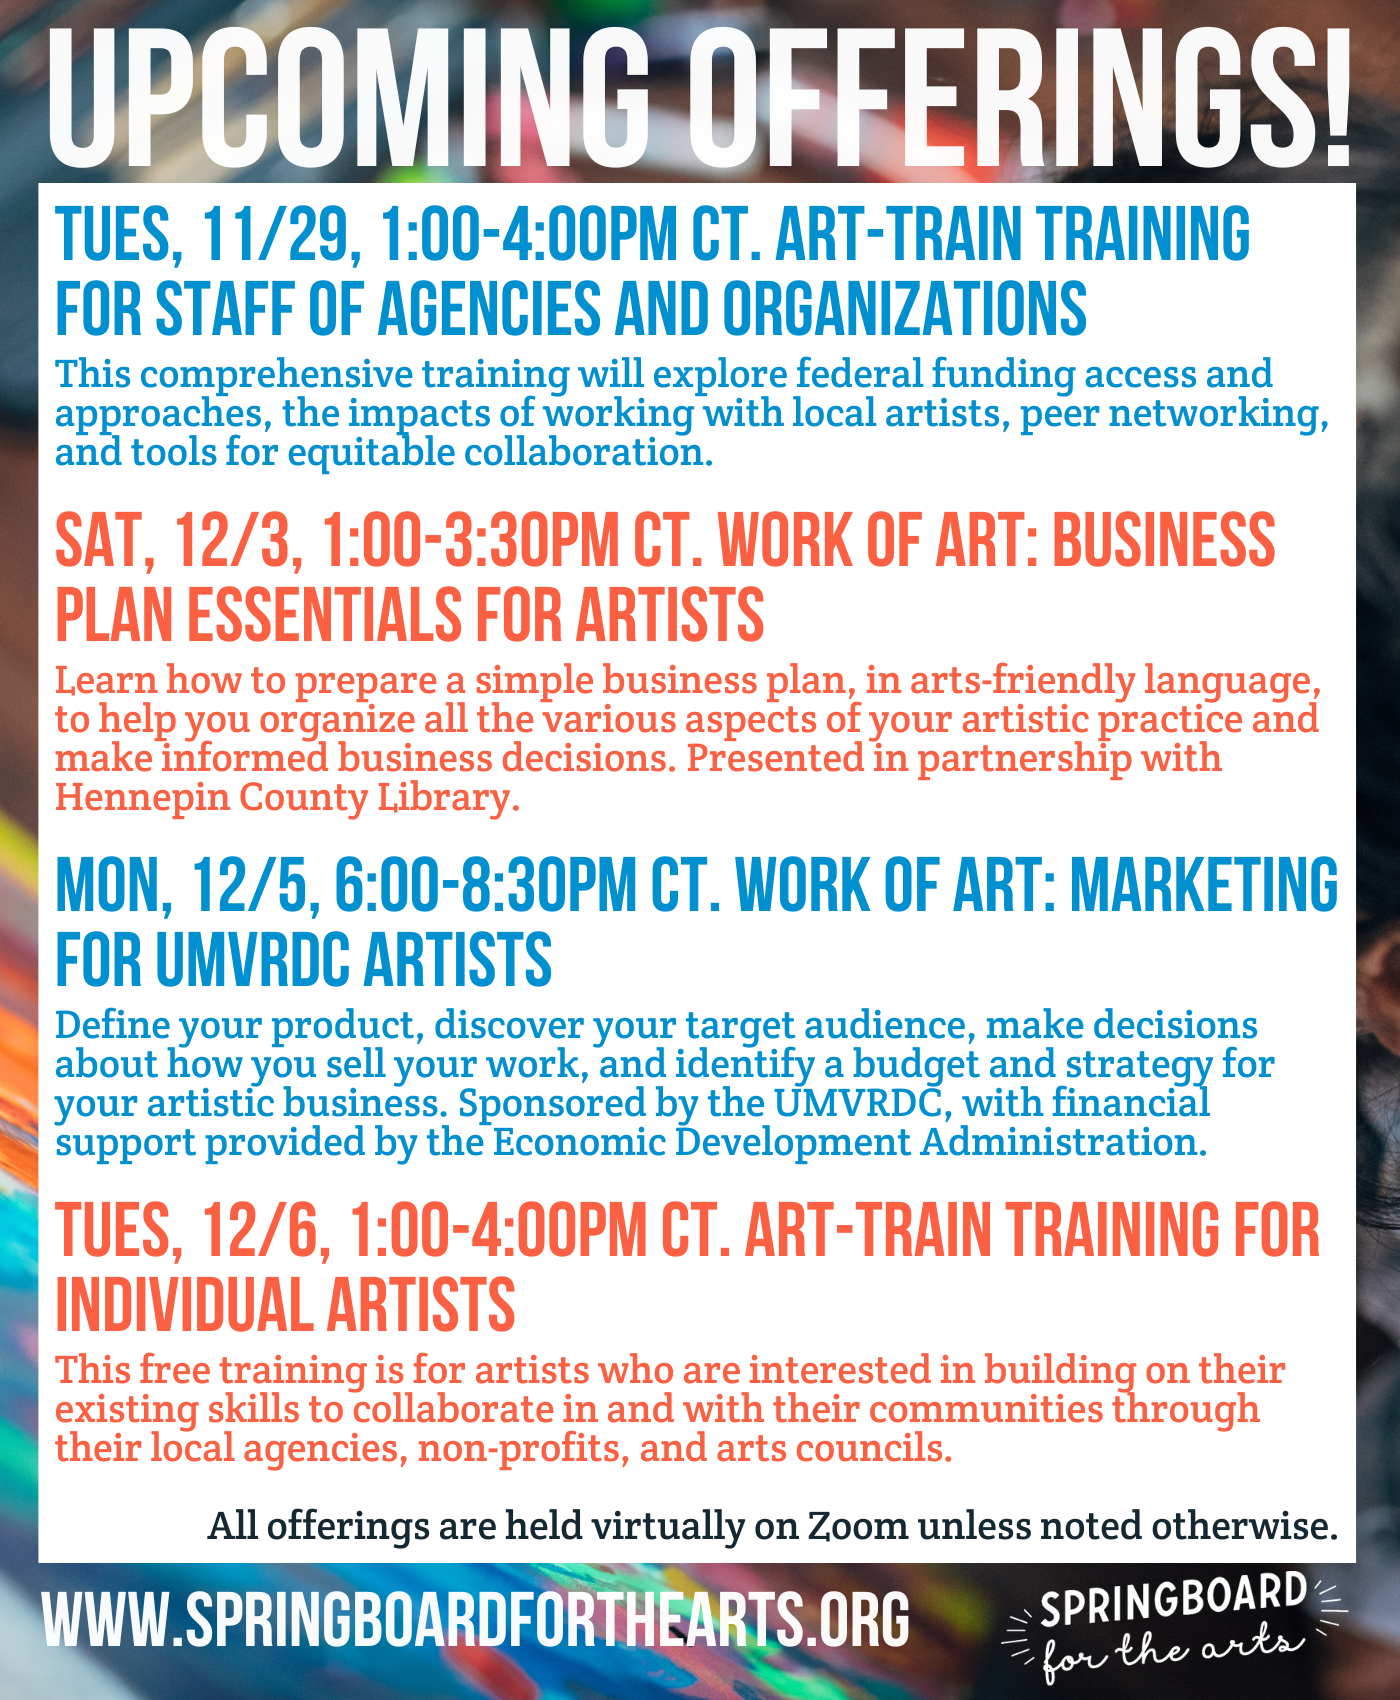 December offerings at Springboard for the Arts